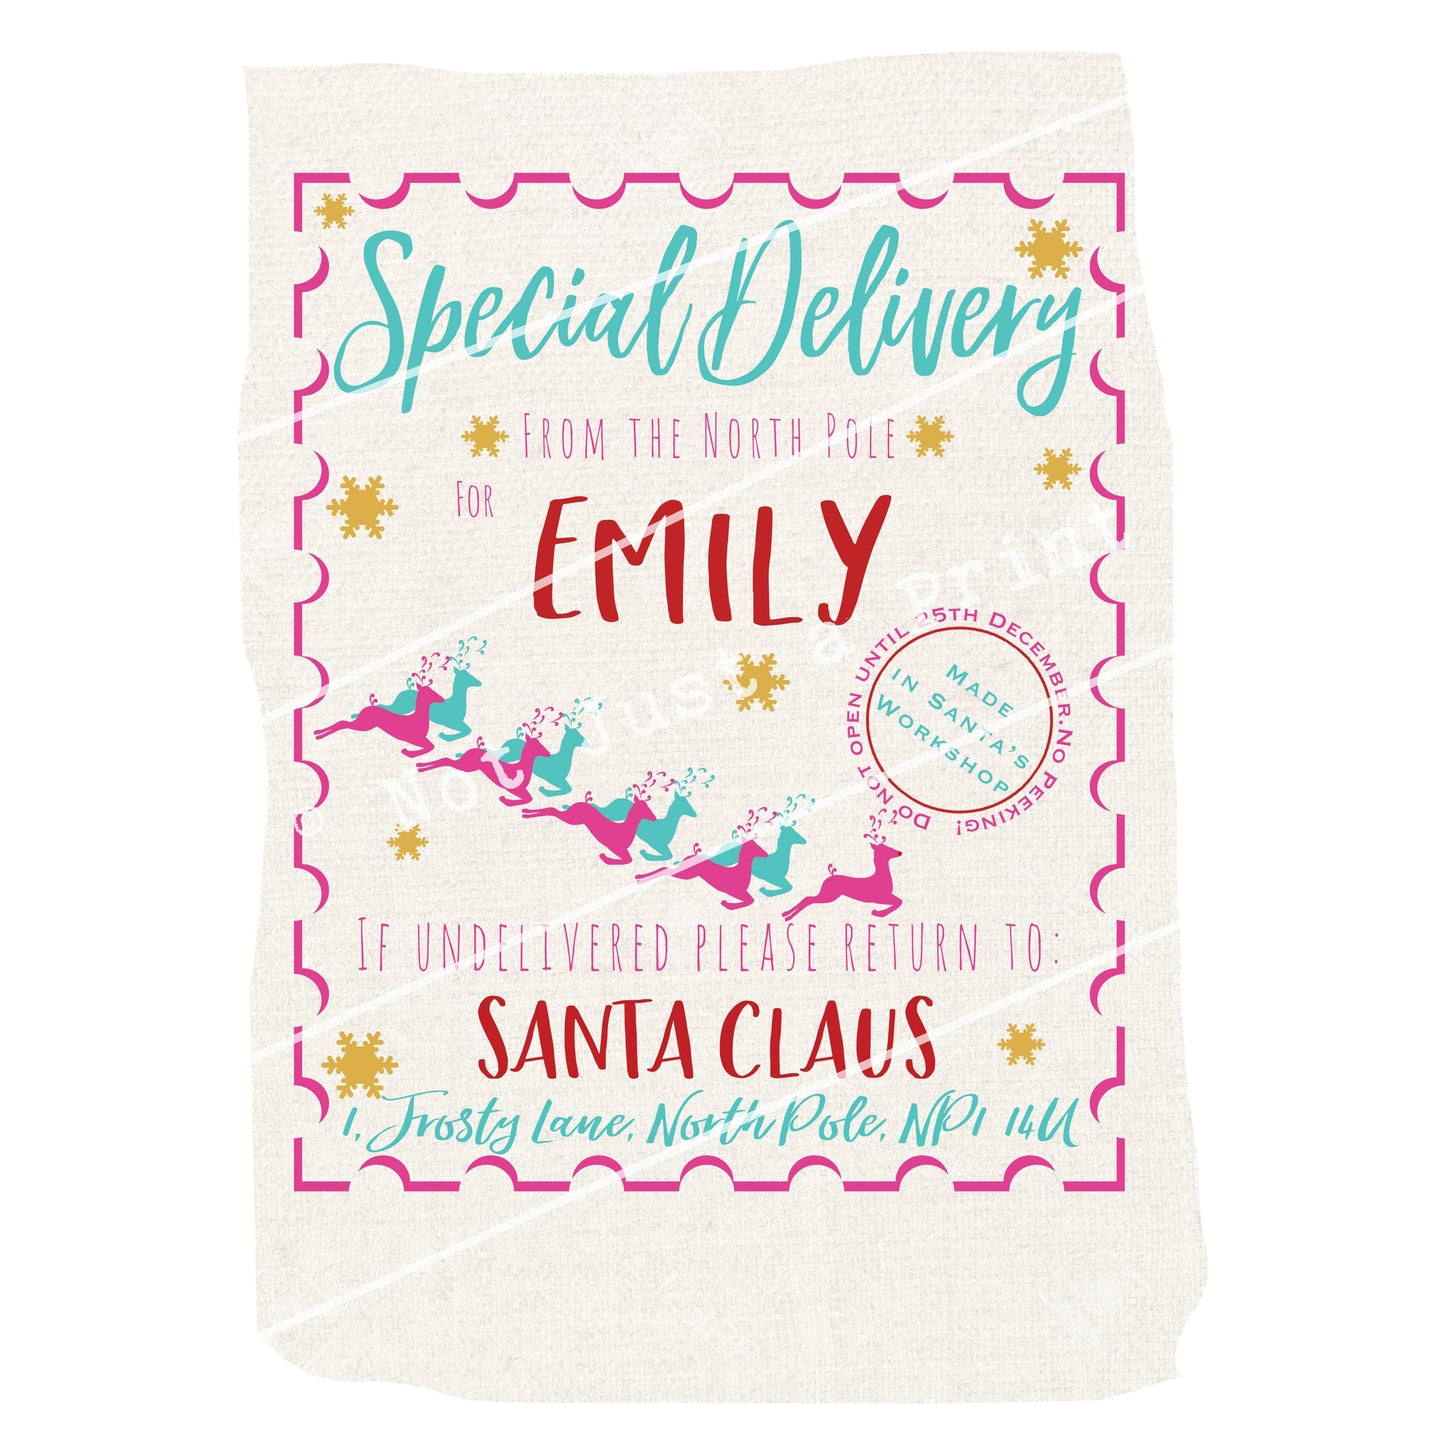 Multi-Coloured Christmas Decorative Gift Sack - Personalised With Name - Kids Teens Or Adults Santa Sack